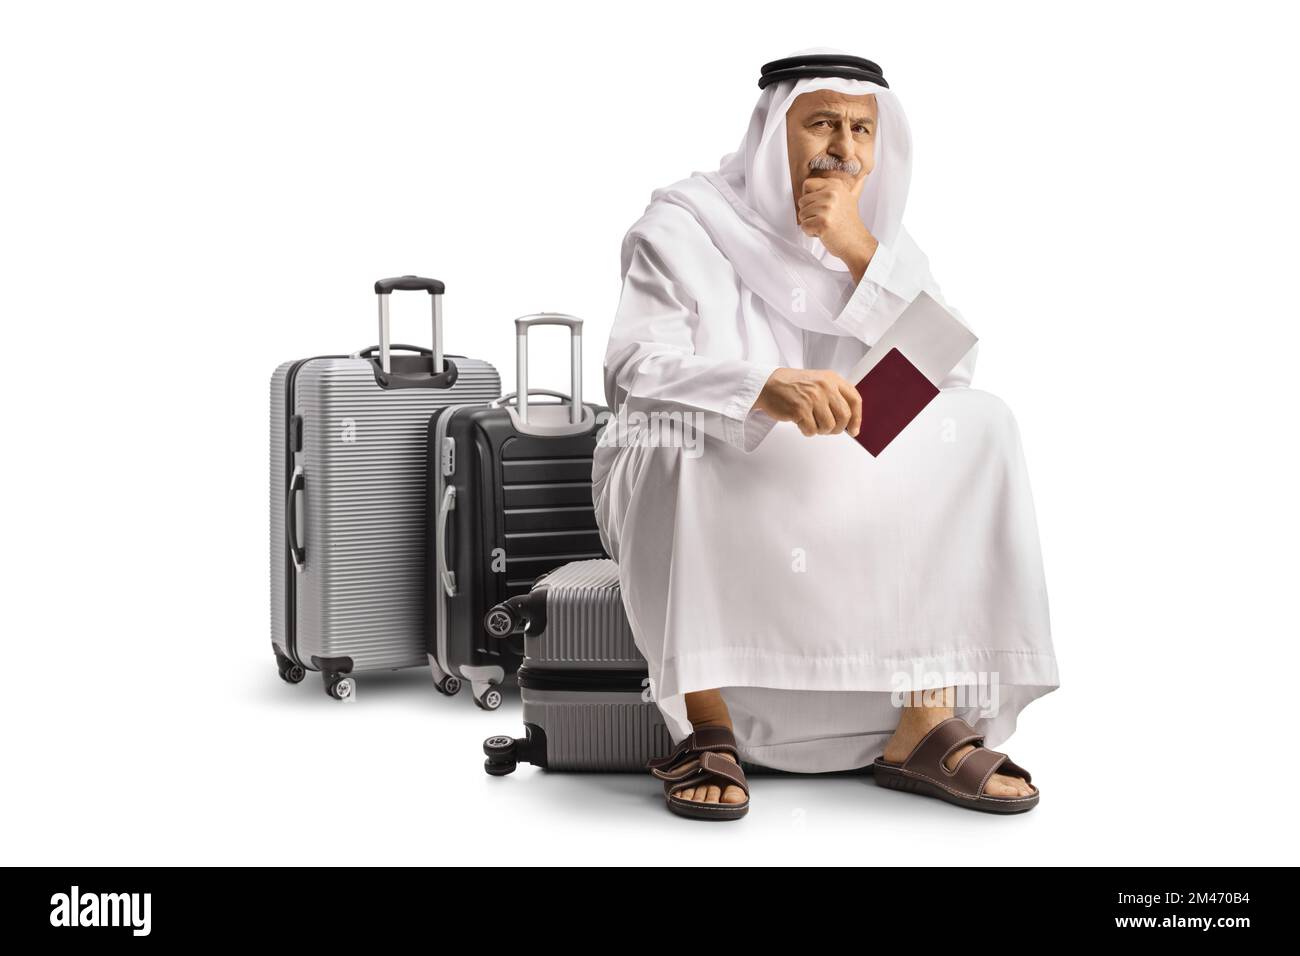 Arab man sitting on a suitcase holding a passport and waiting for a flight isolated on white background Stock Photo